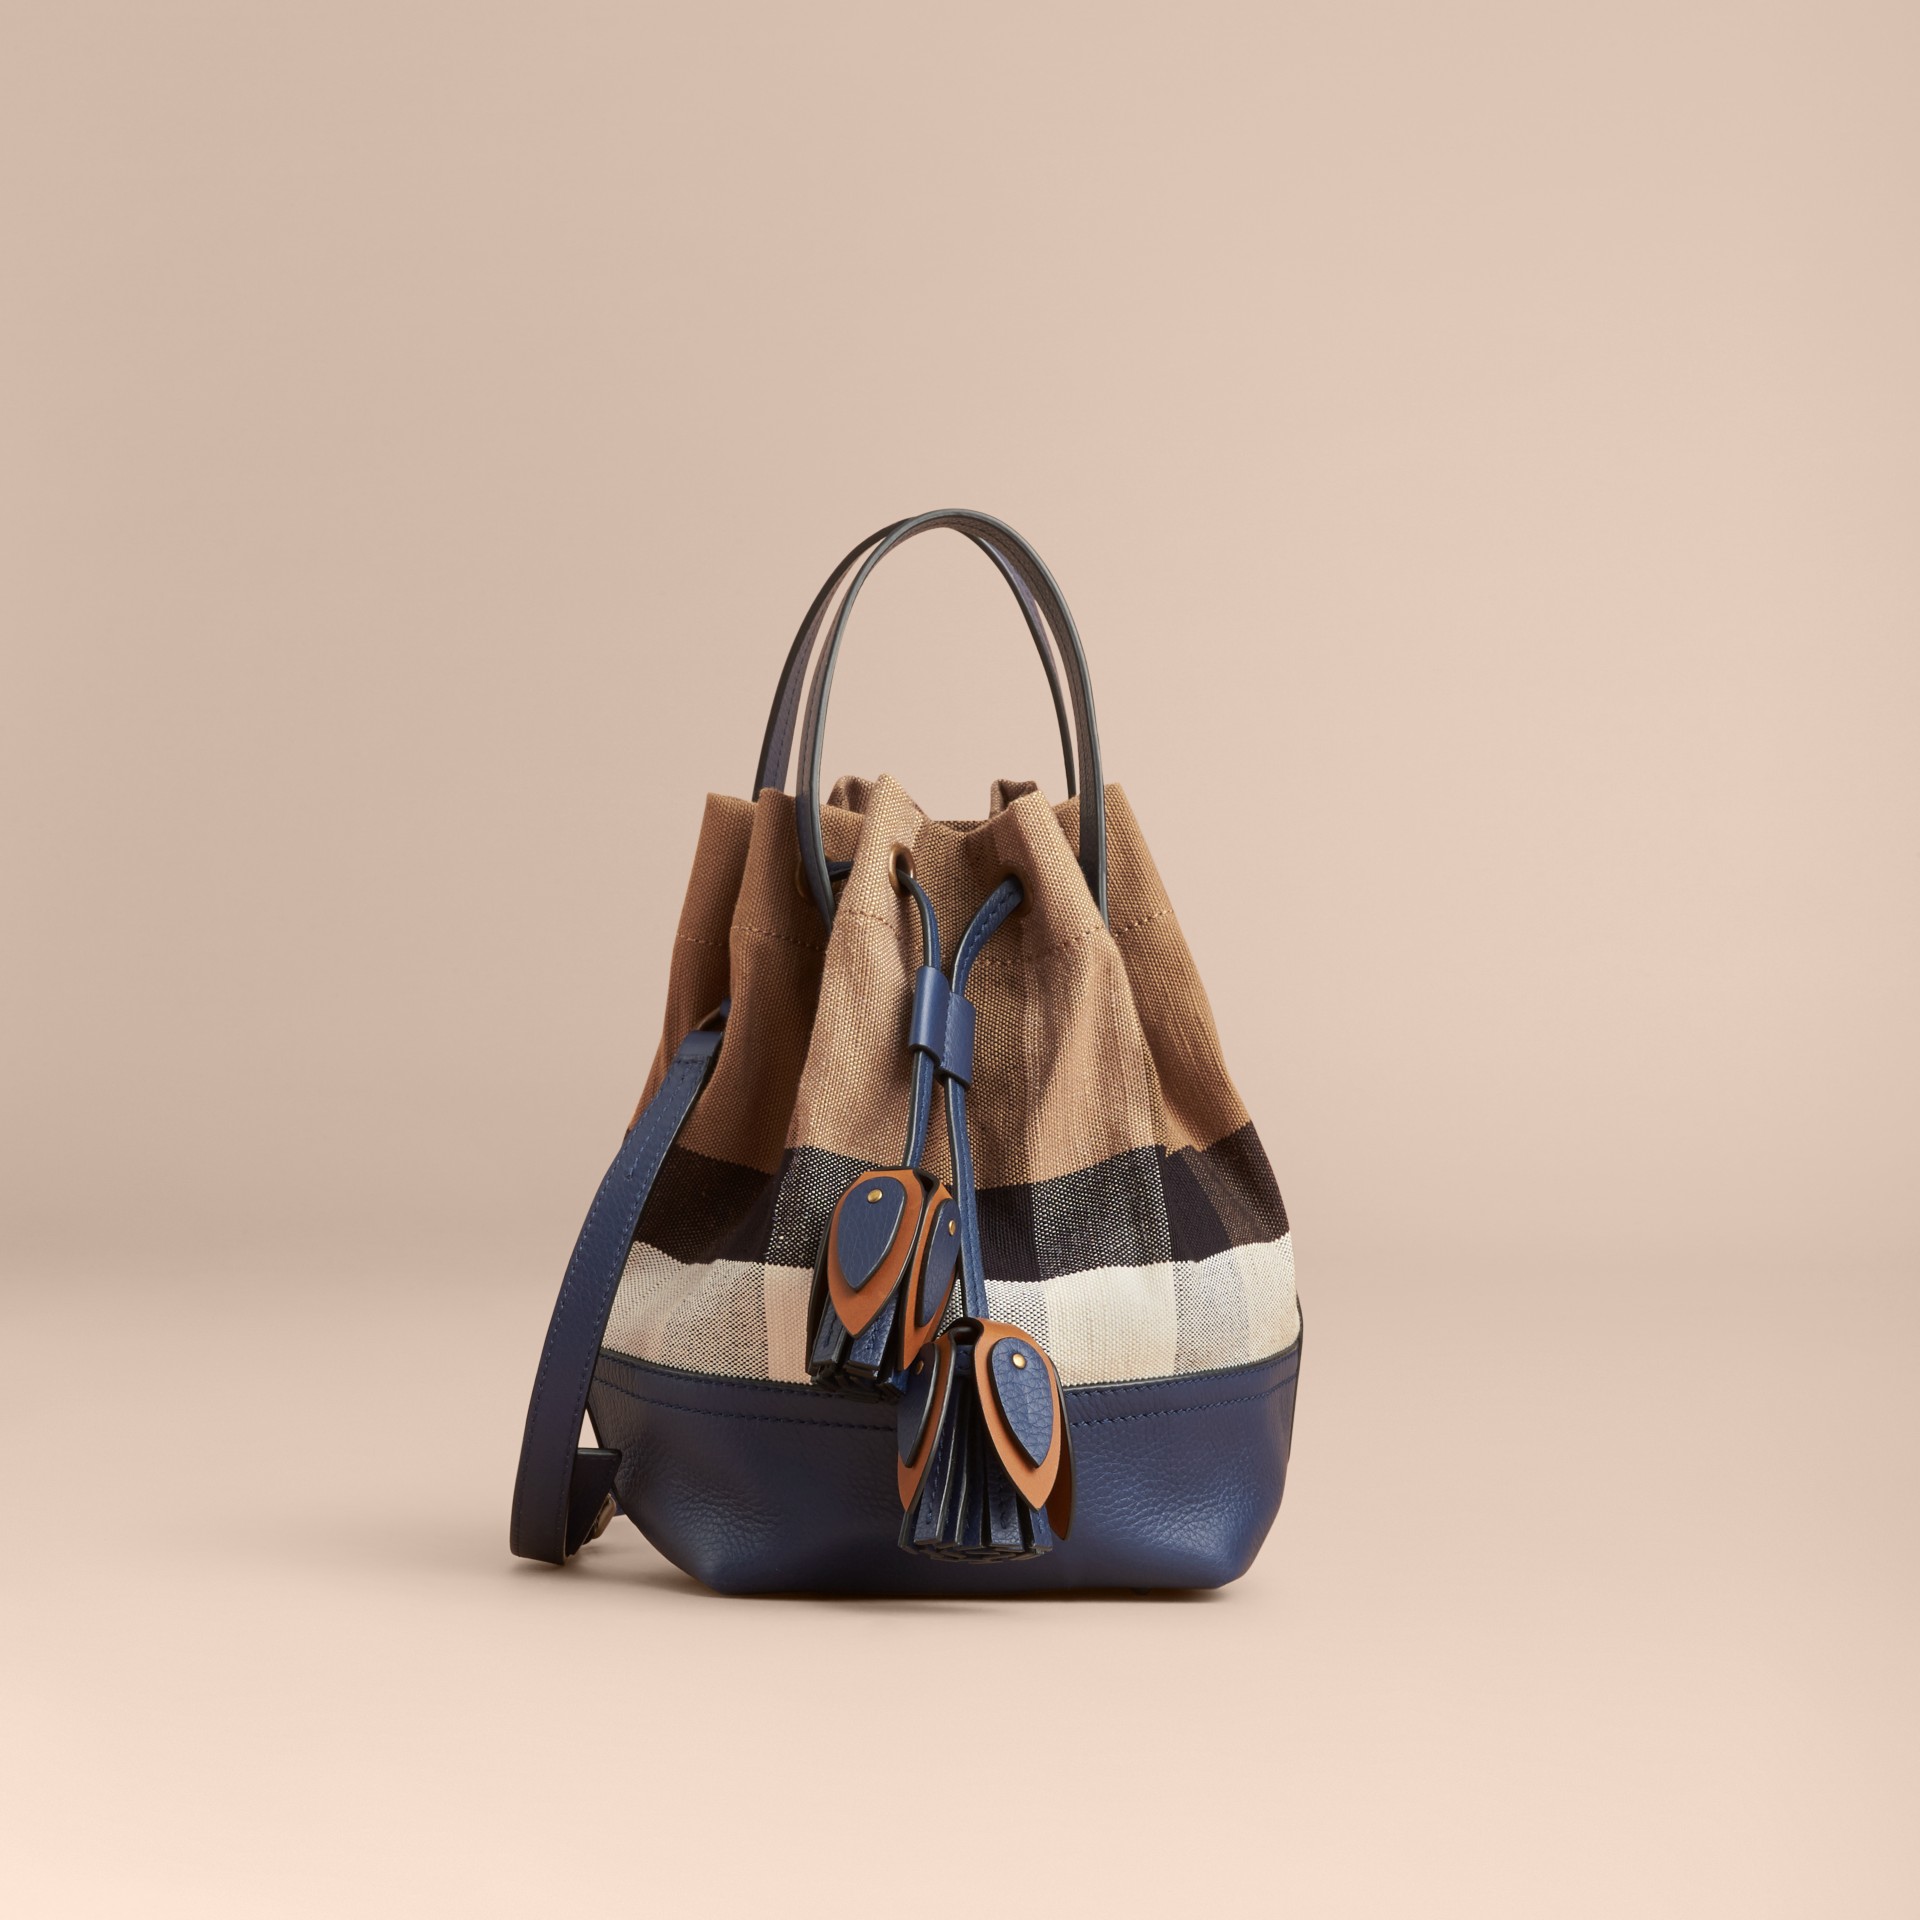 Small Canvas Check and Leather Bucket Bag in Brilliant Navy - Women | Burberry United States